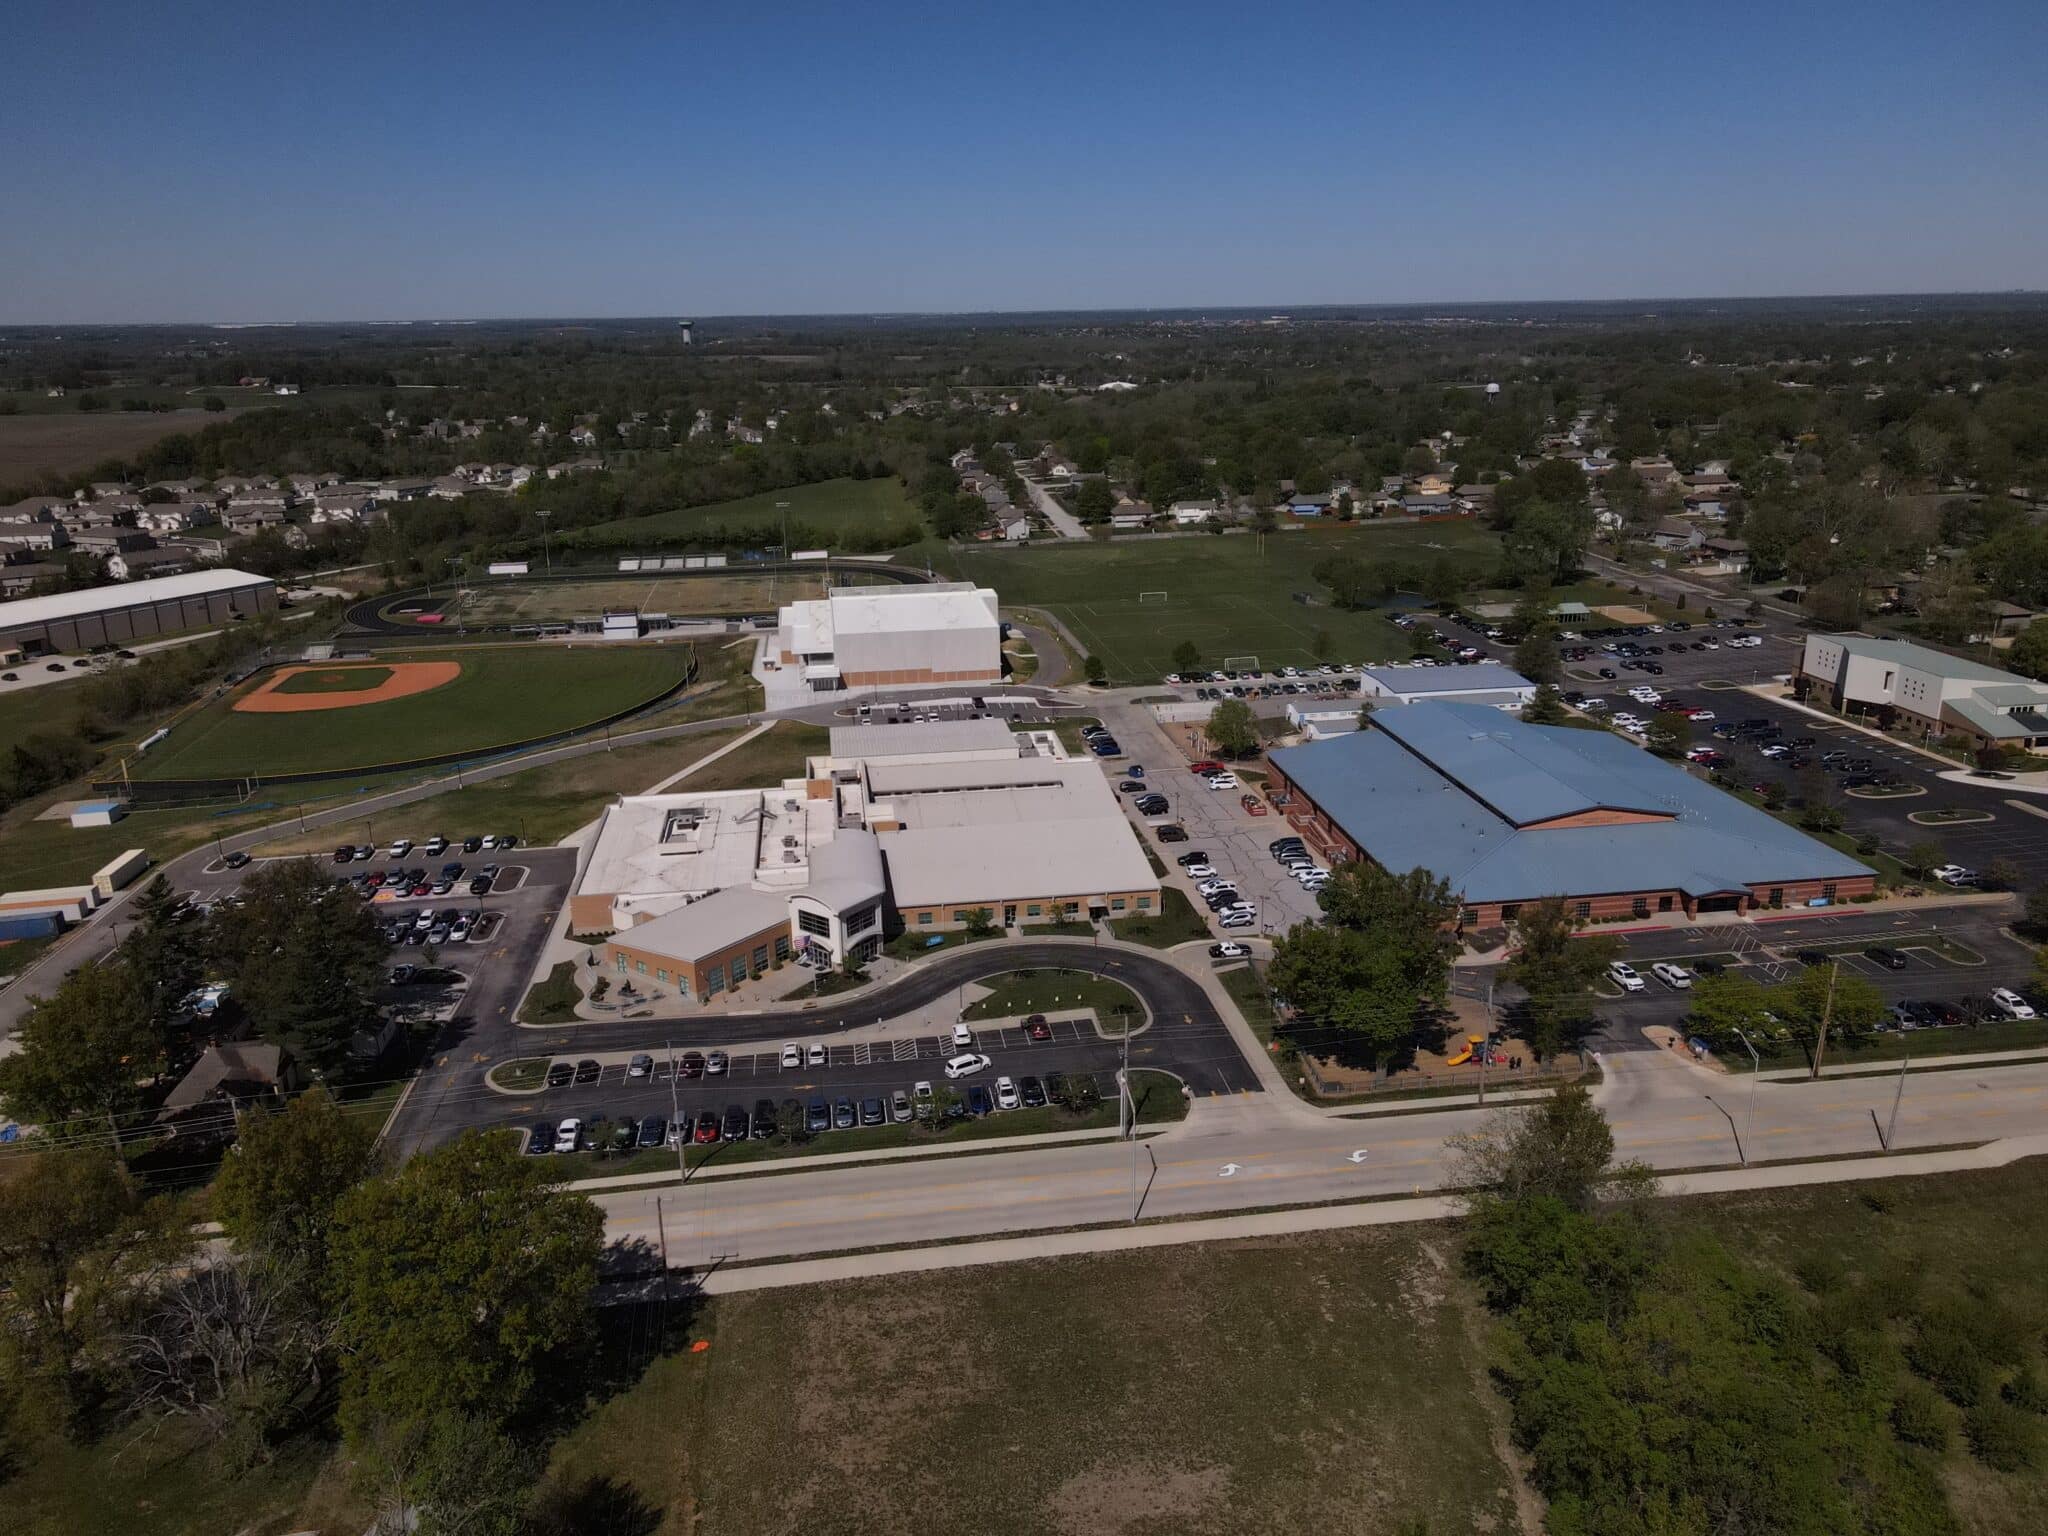 Summit Christian Academy has been ranked first in the Kansas City Business Journal’s list of Top Area Private Schools. This is SCA’s tenth consecutive year to be ranked in the top five.